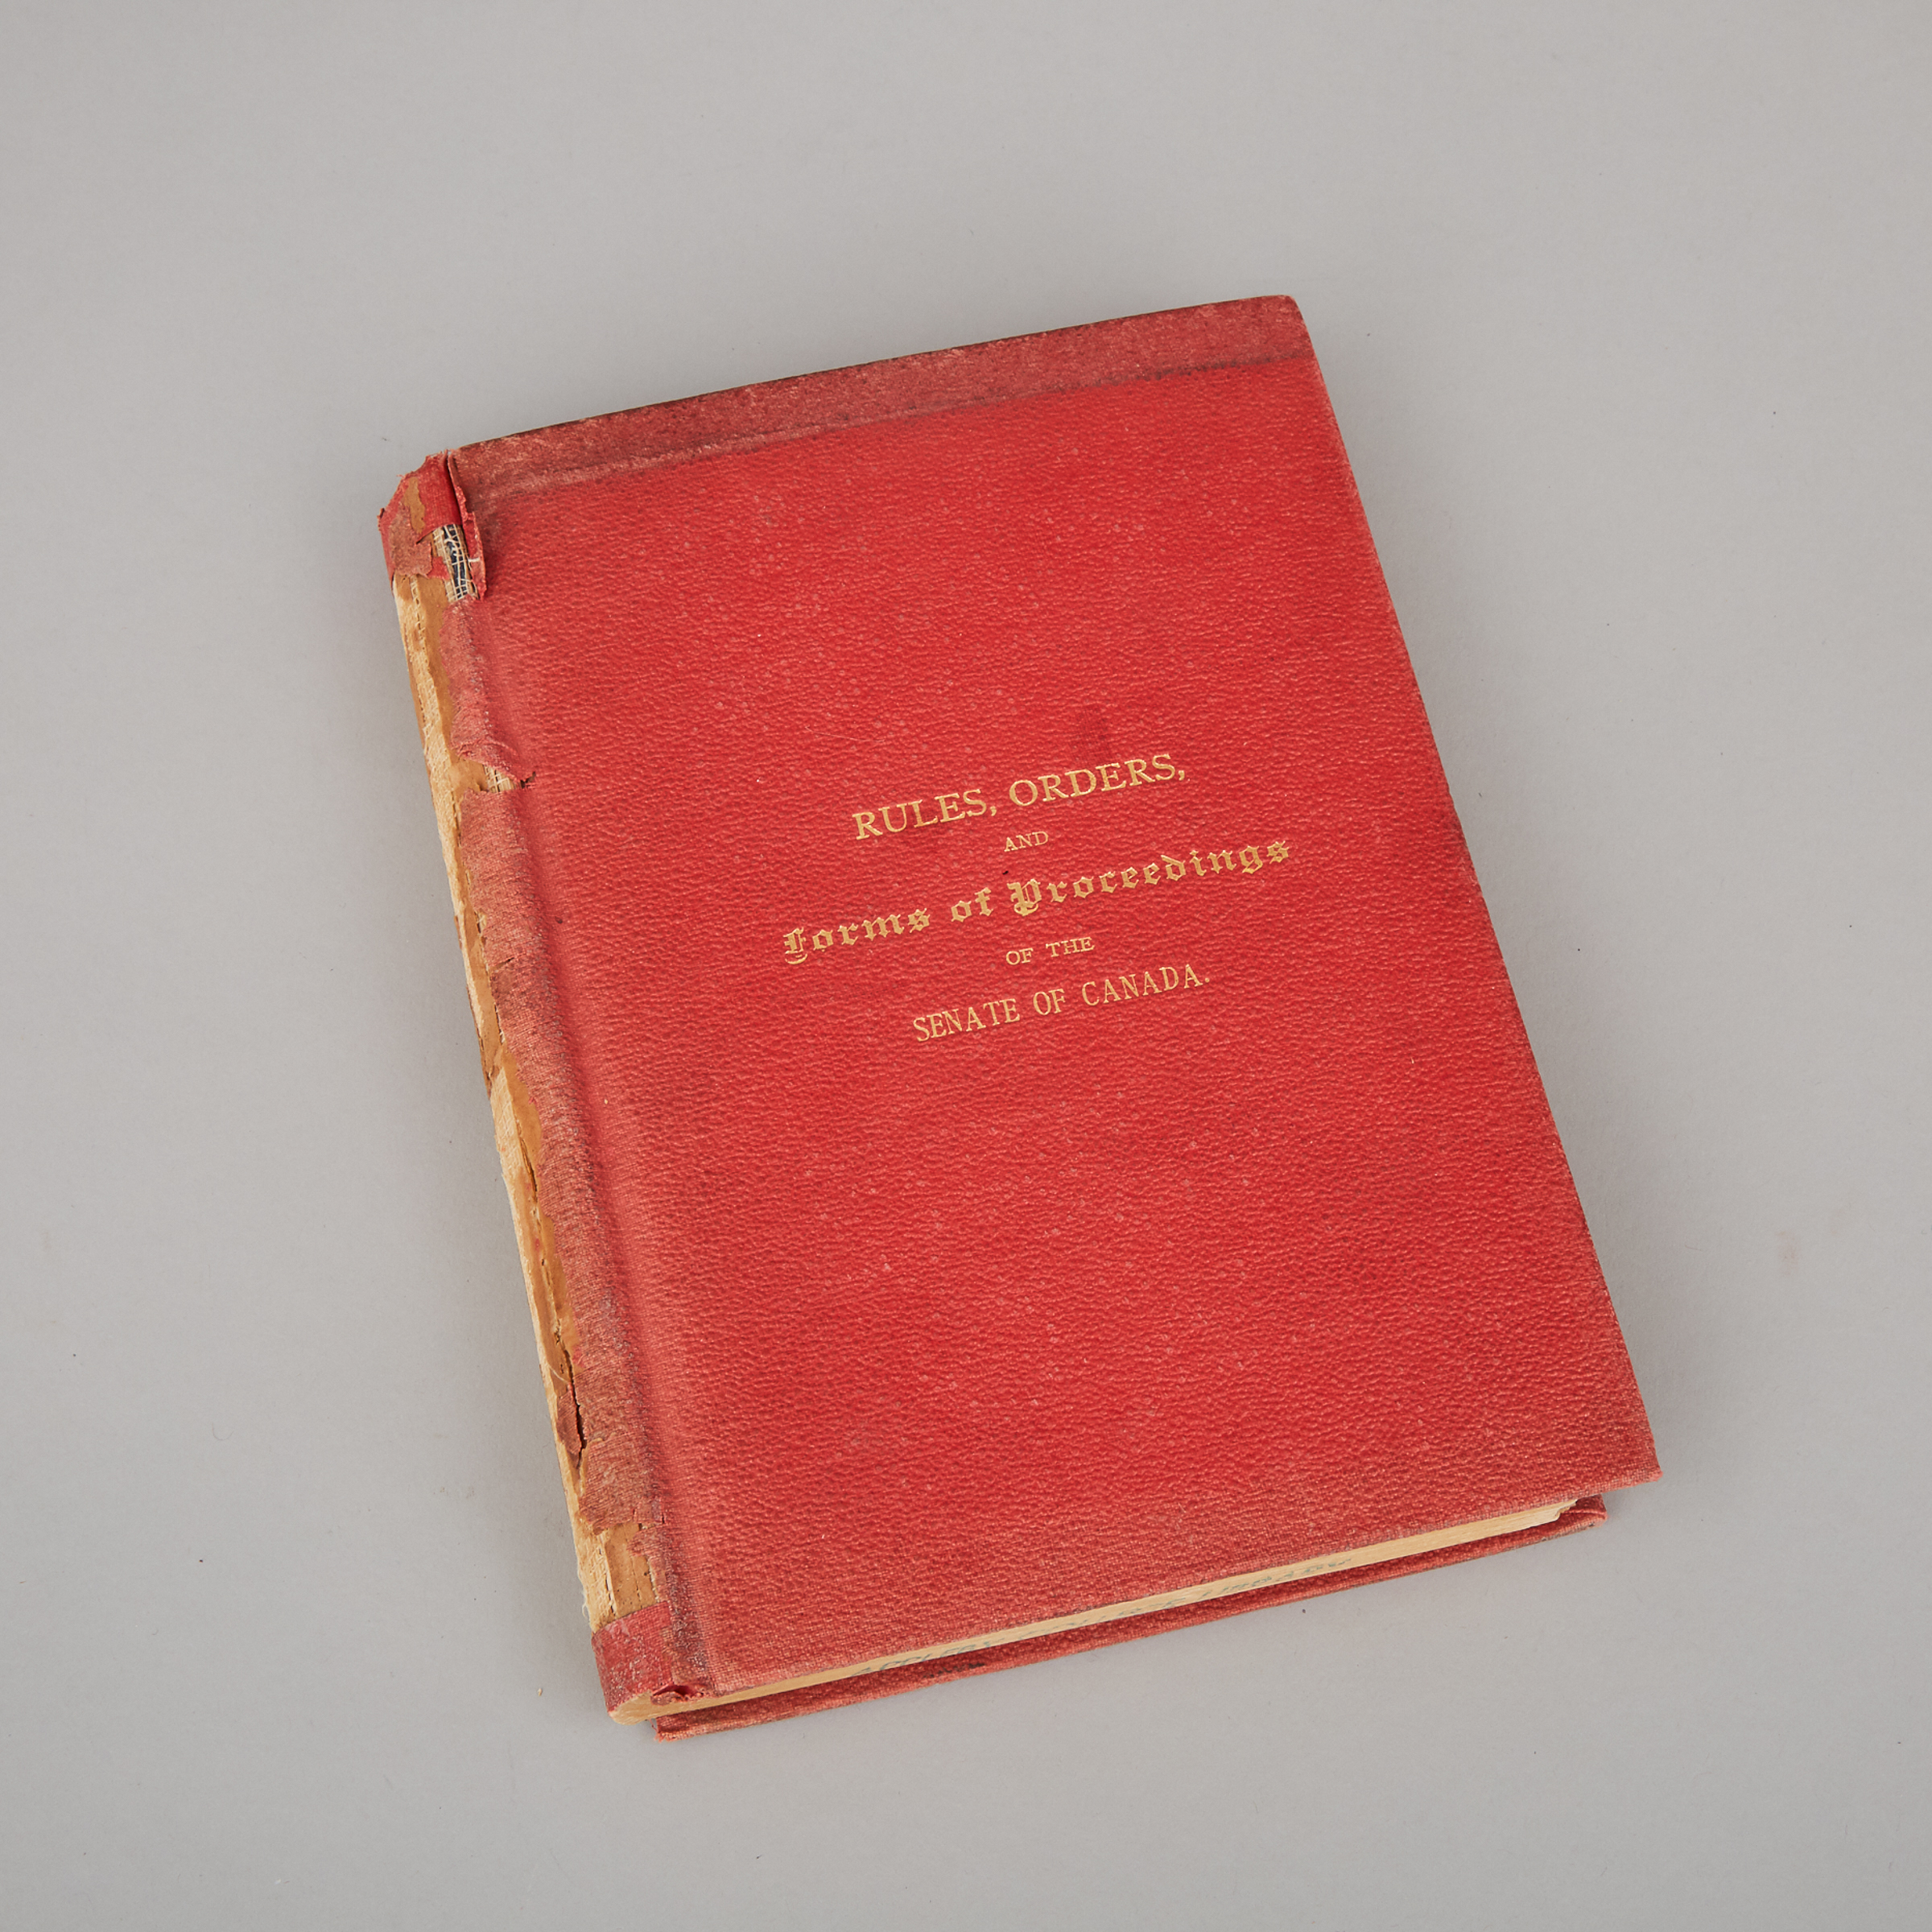 'Canada Senate Manual' Presented to Sir Wilfrid Laurier by the Honourable Senator Lawrence Geoffrey Power, Oct. 29th, 1907